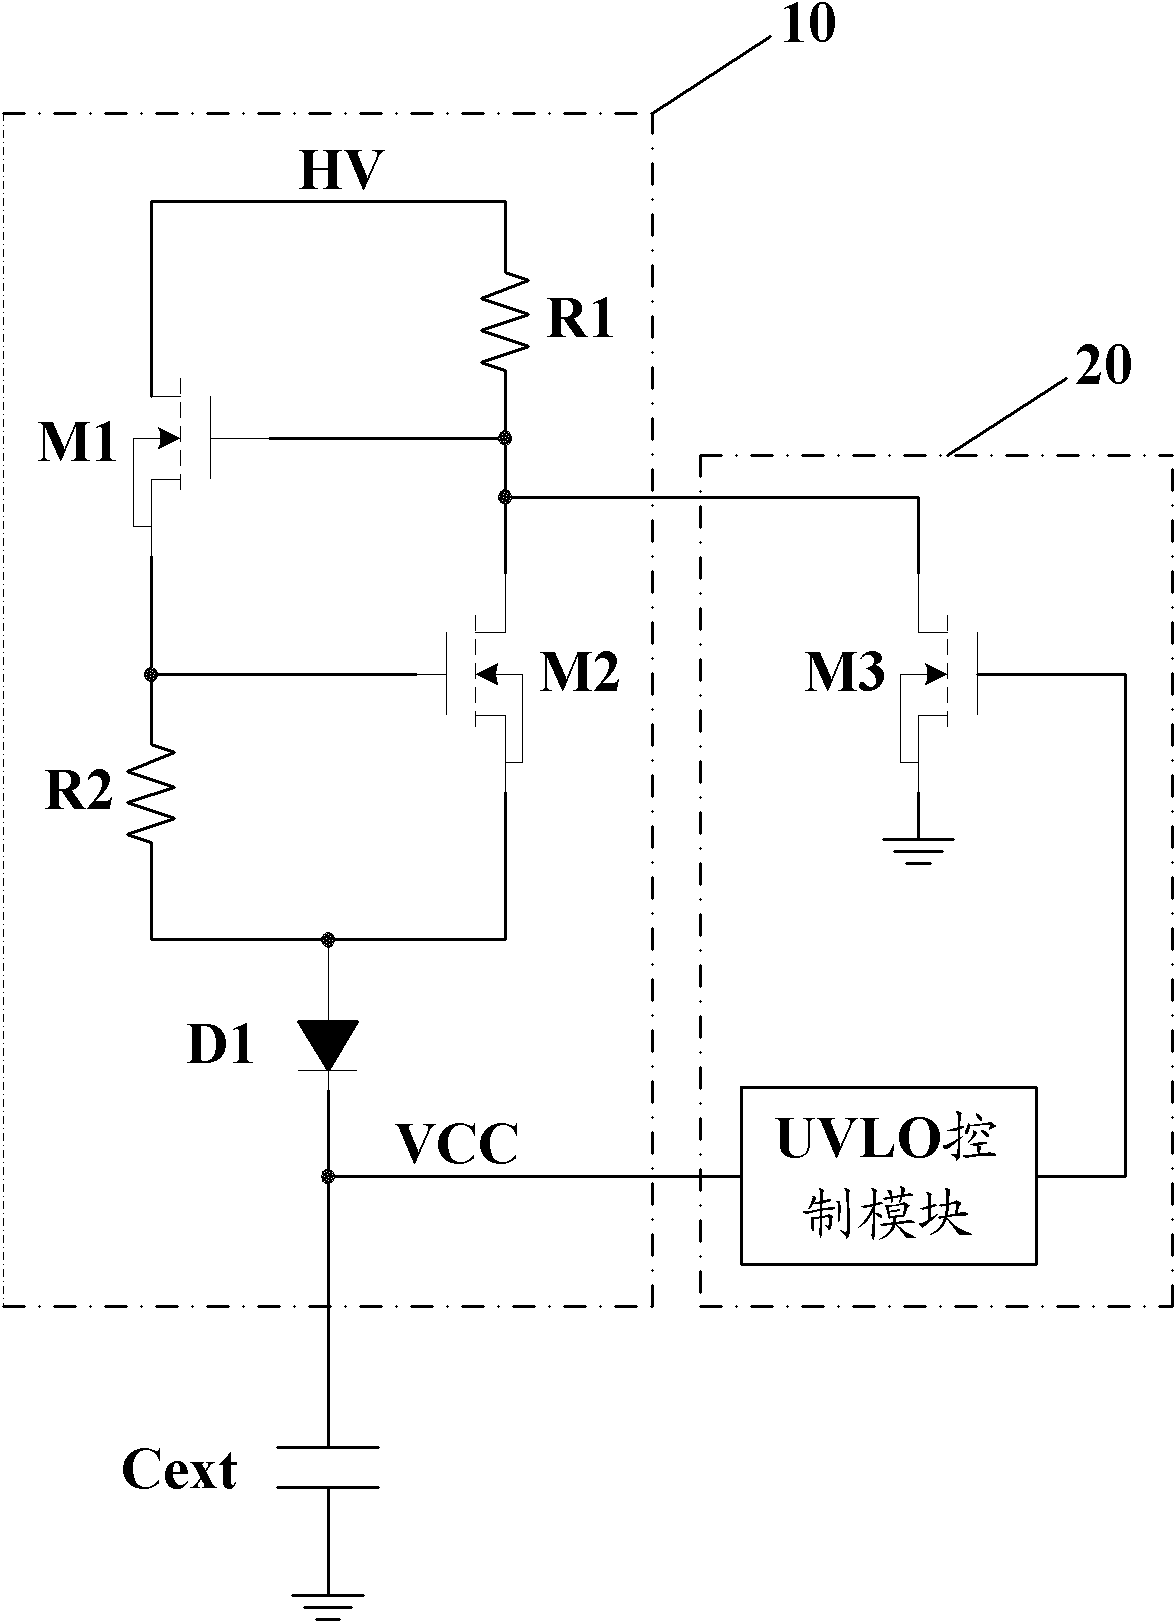 High voltage starting circuit applied to AC/DC converter